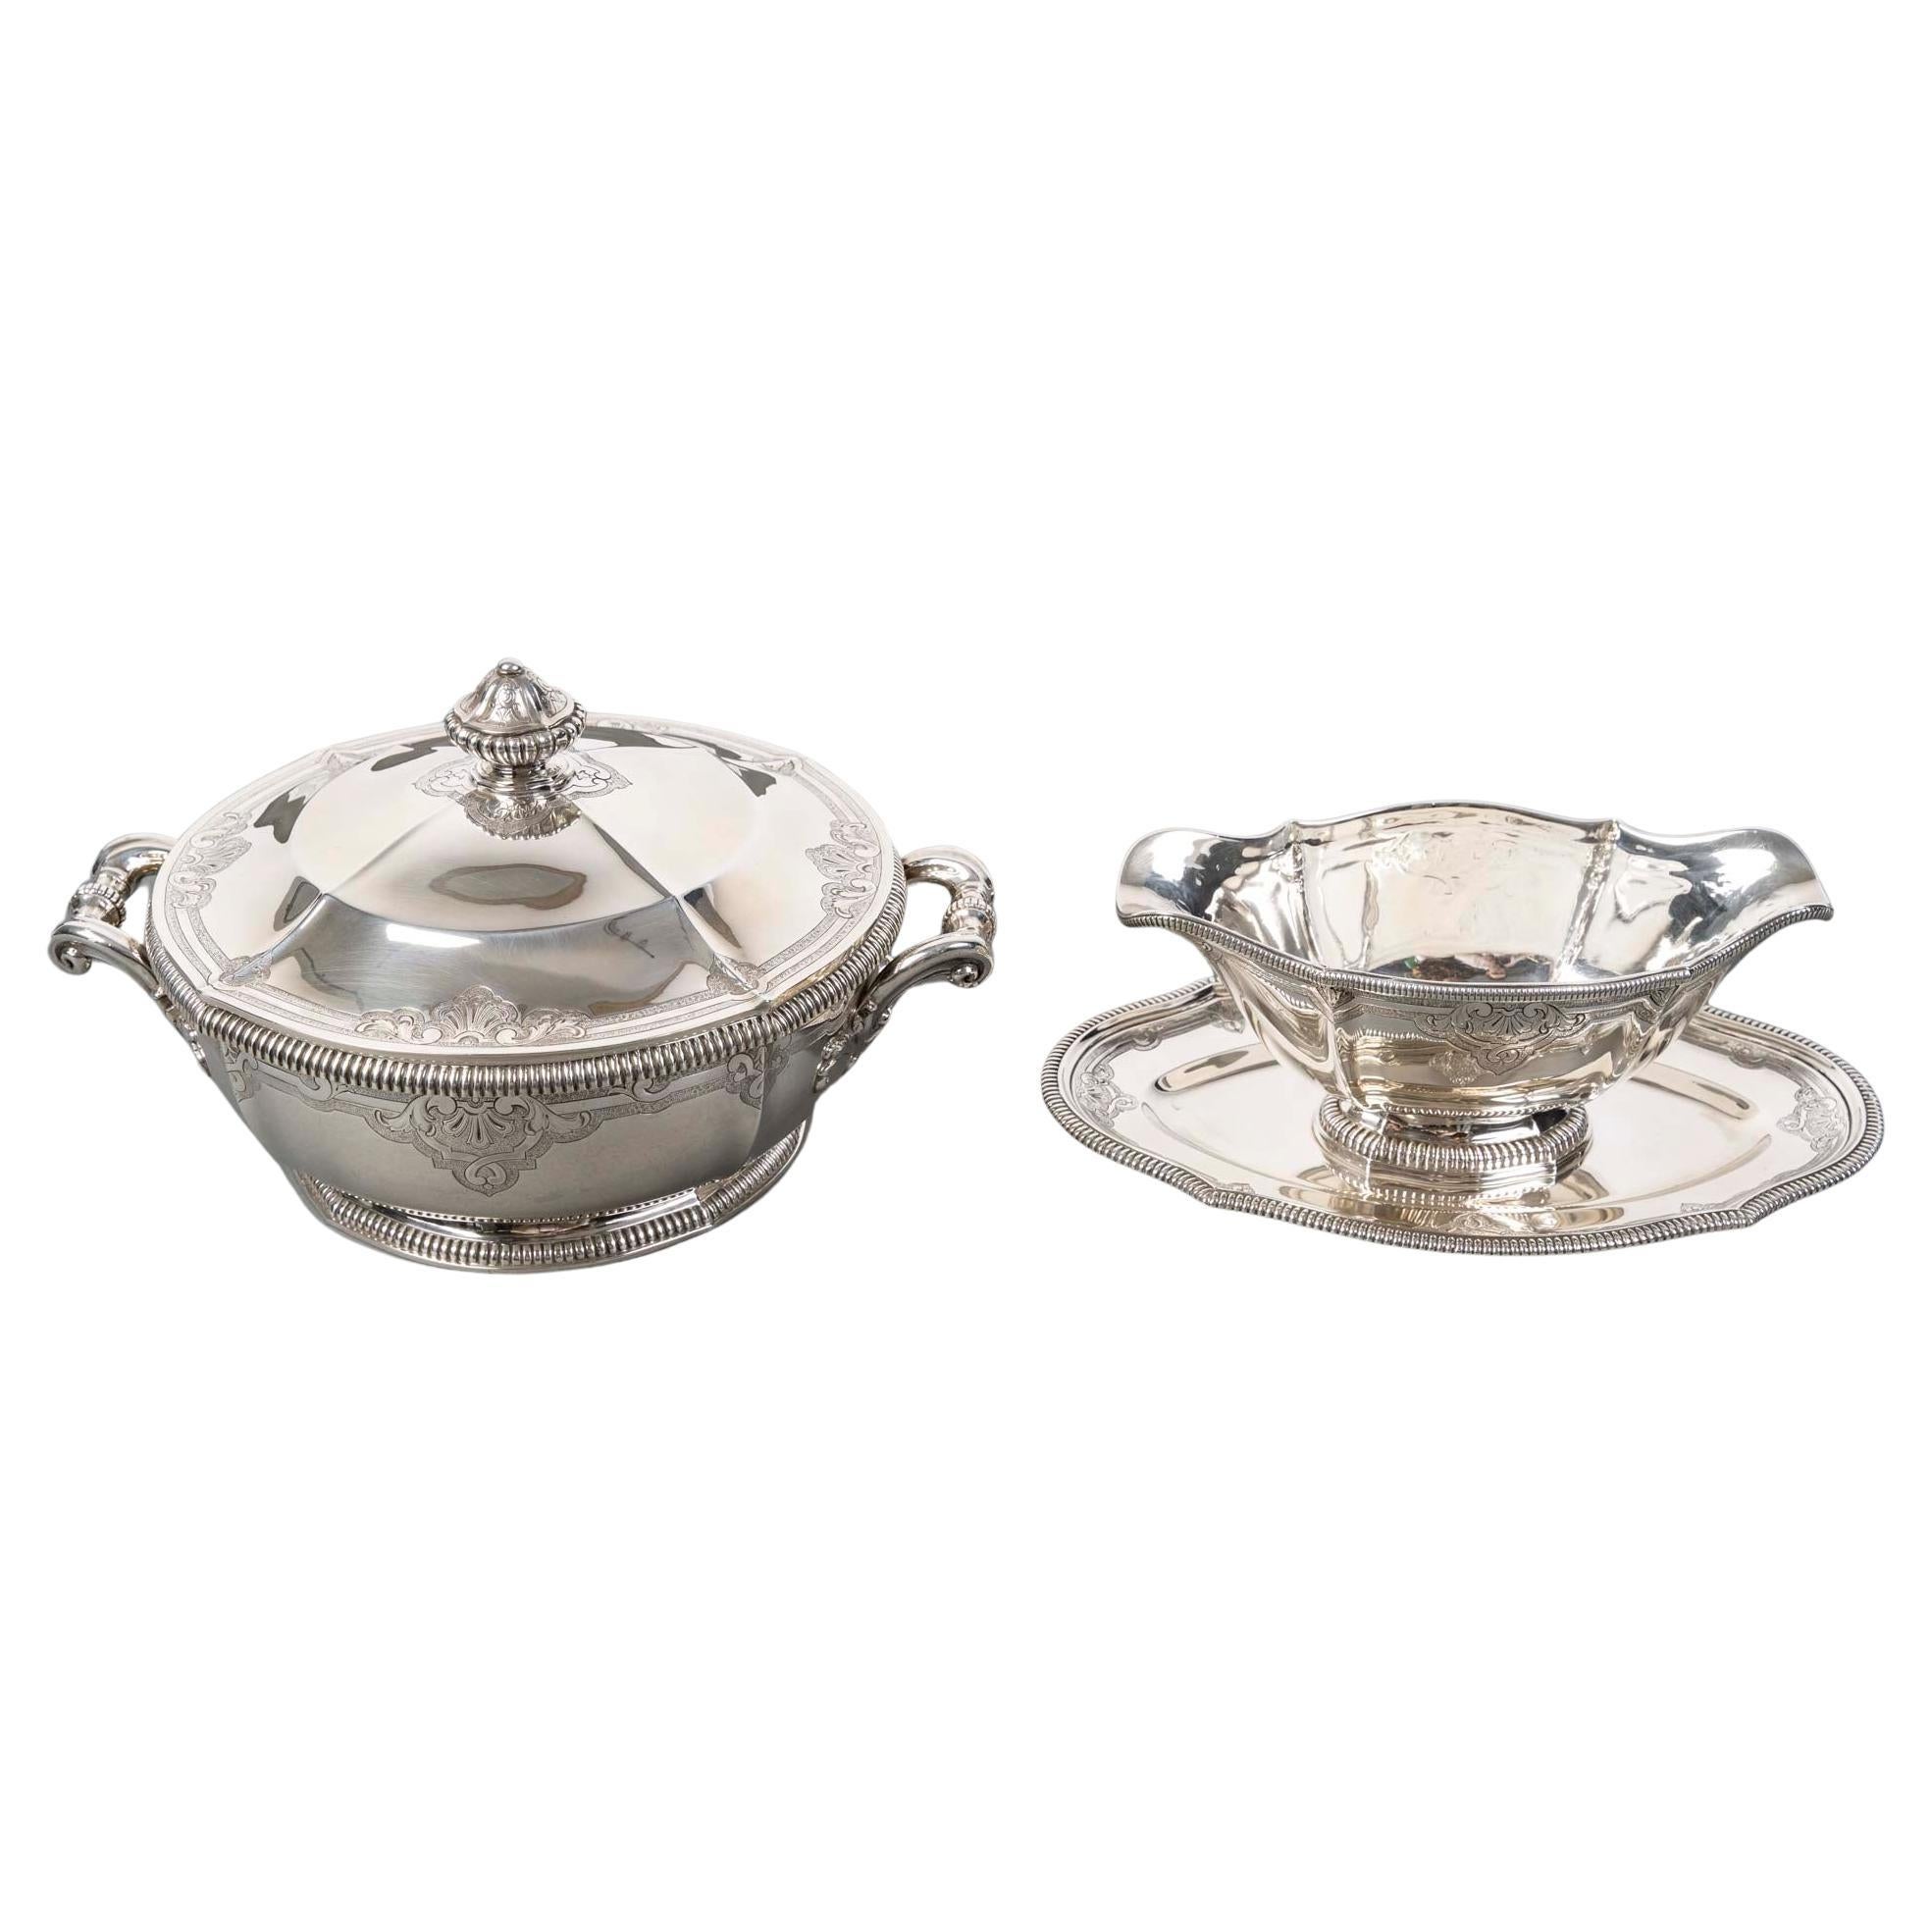 Lapparra - Vegetable Dish And Sauce Boat In Solid Silver Circa 19th Century For Sale